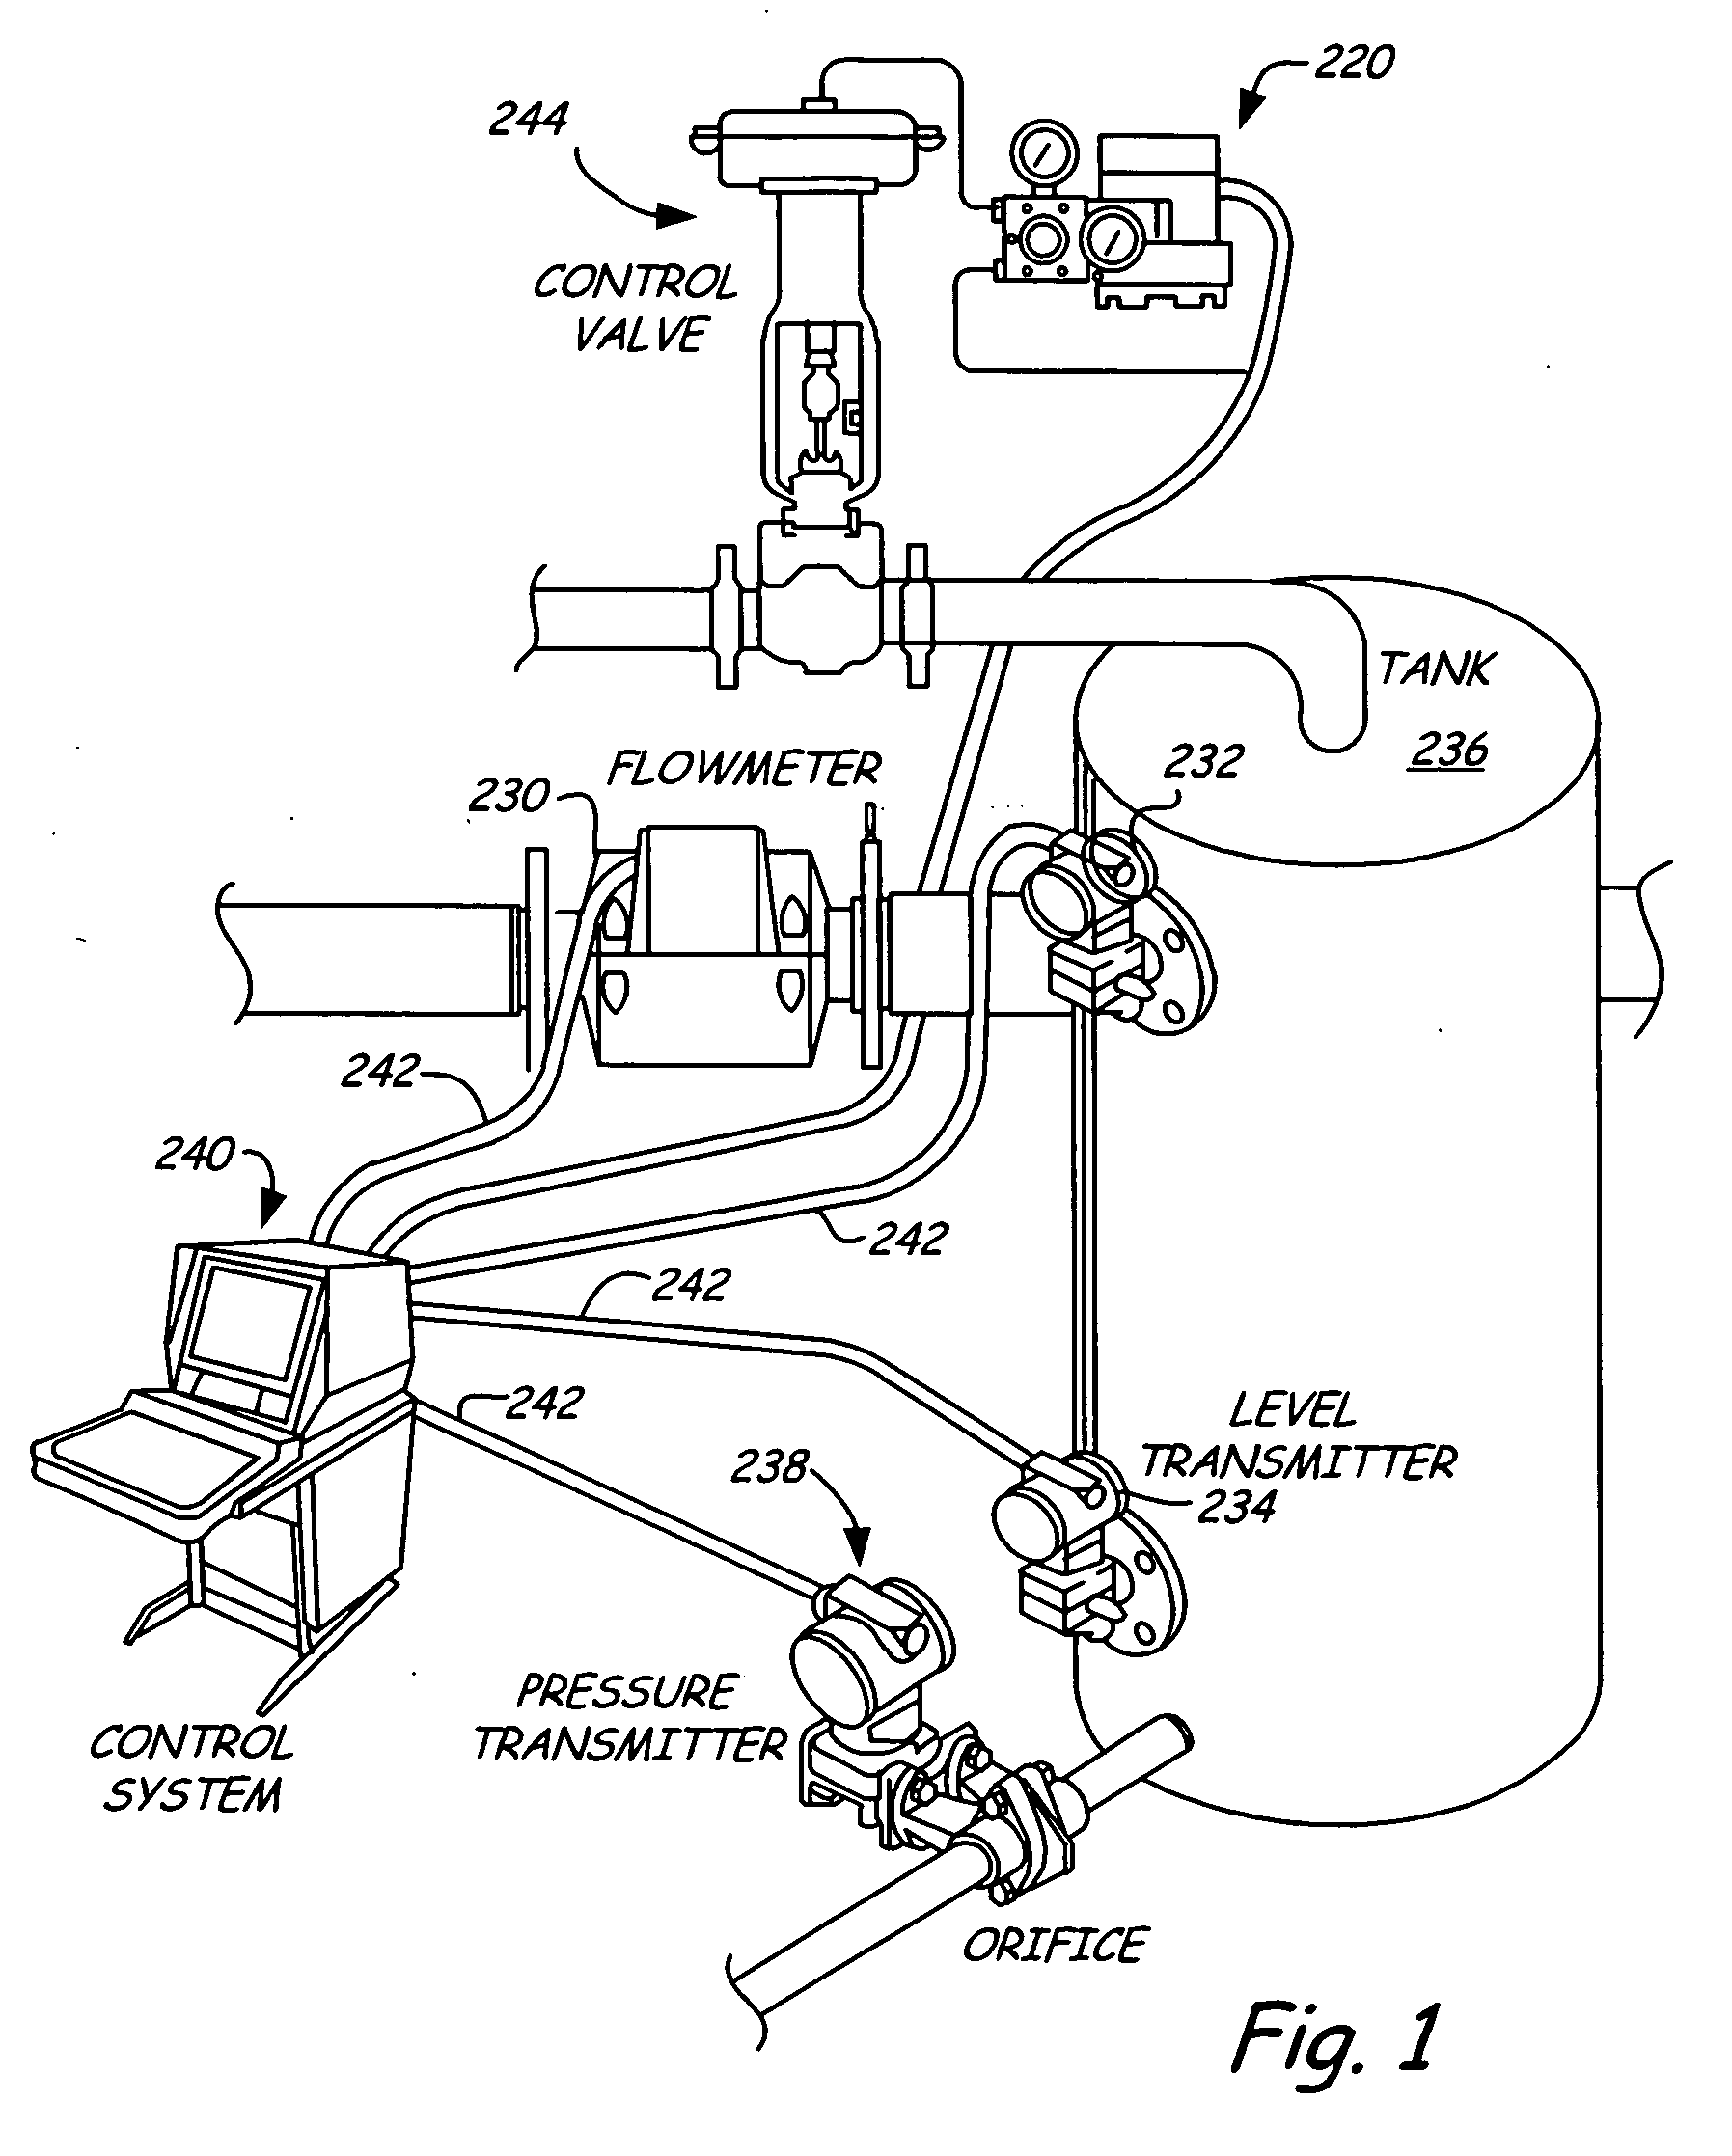 Process variable transmitter with diagnostics